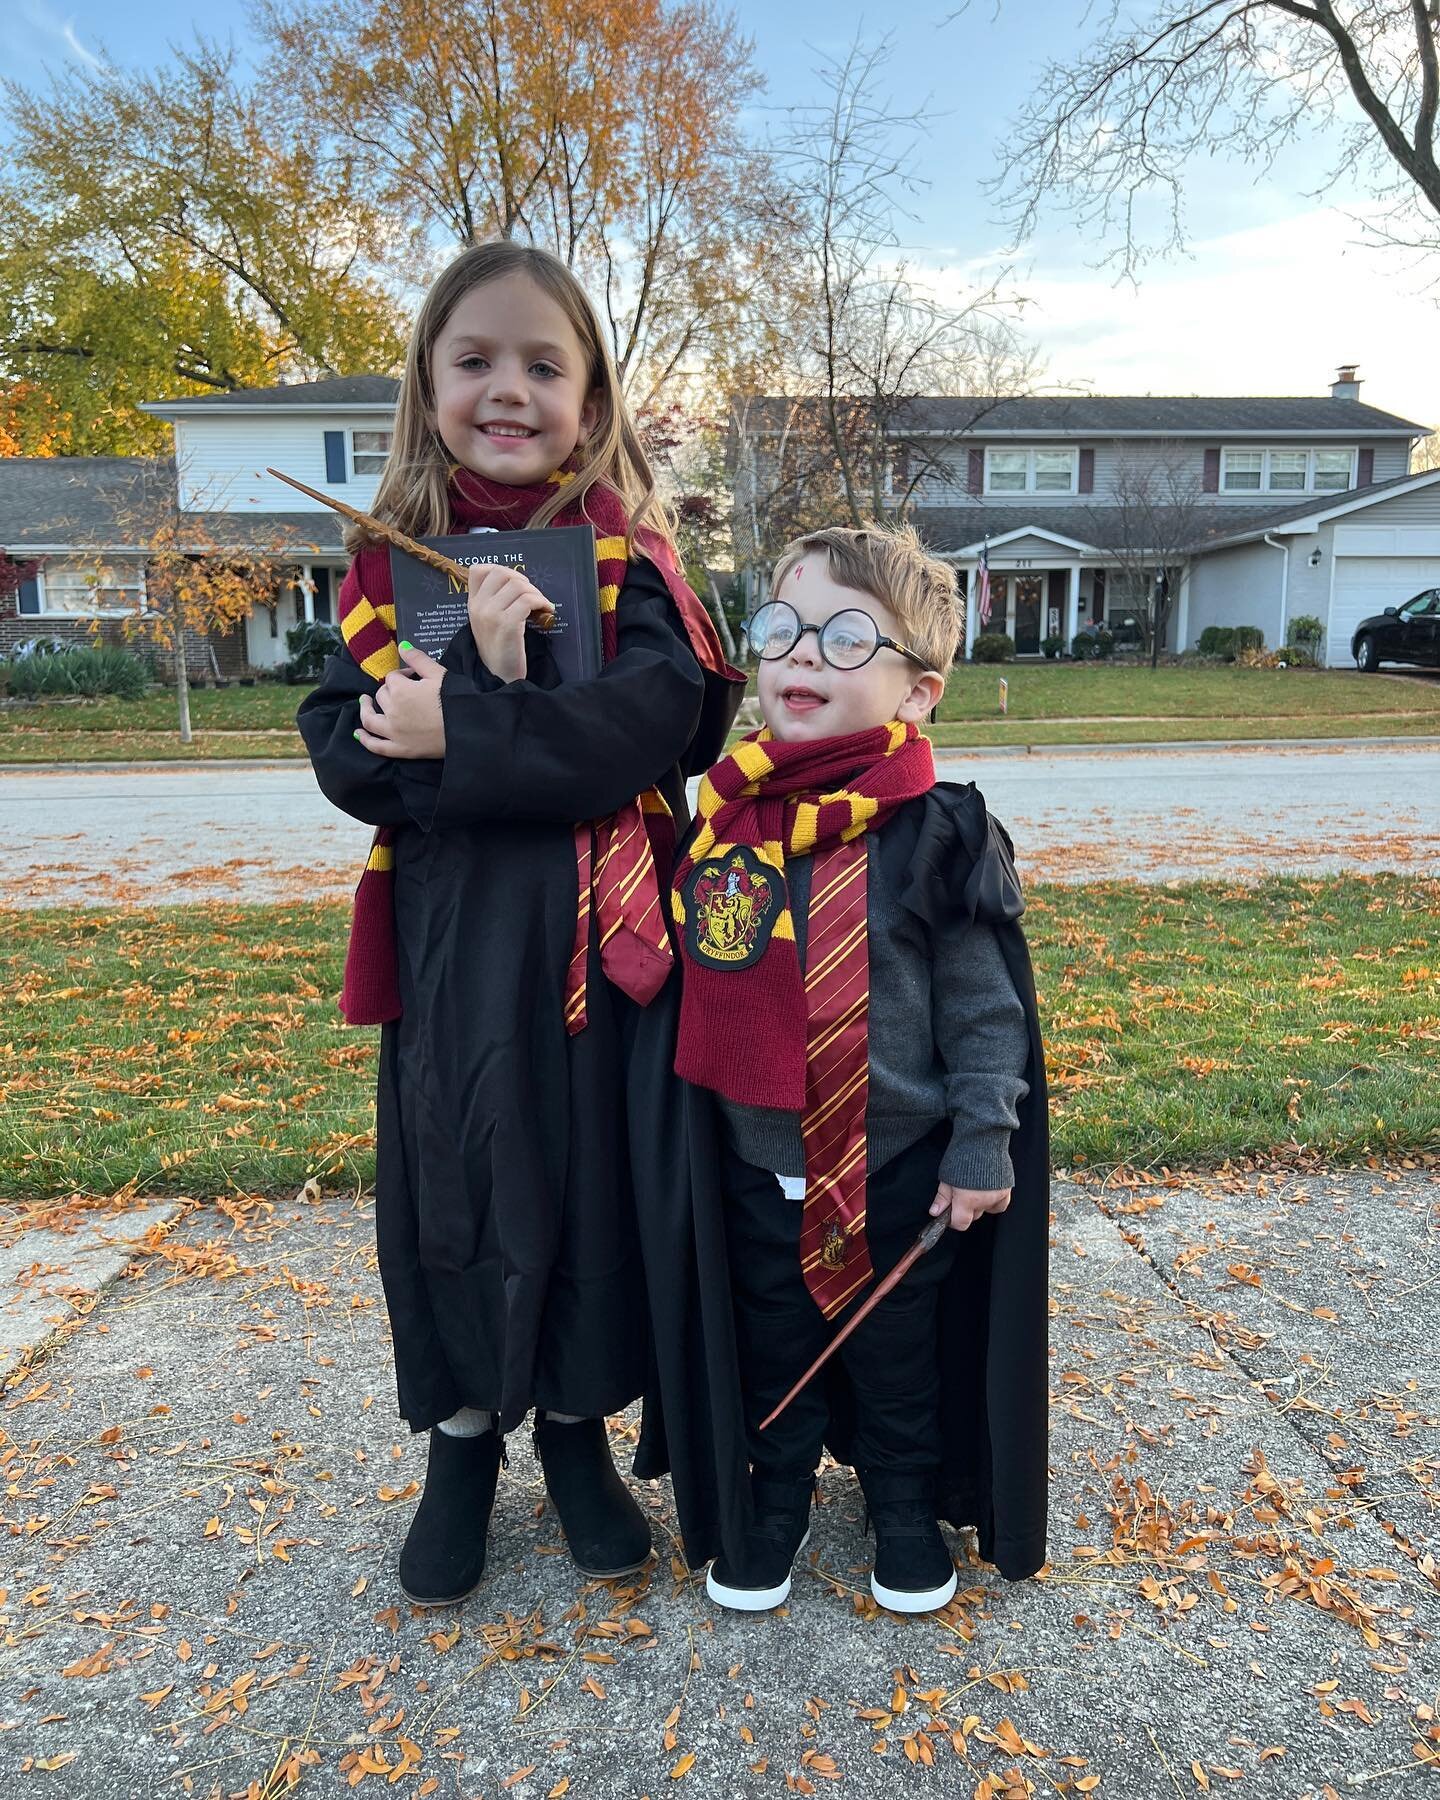 Happy Halloween all you witches and wizards. Emma picked out the family costume this year with Ollie having a duel role of Harry Potter and Dobby.
.
.
.
#happyhalloween #halloween #halloweencostume #harrypotter #familycostumes